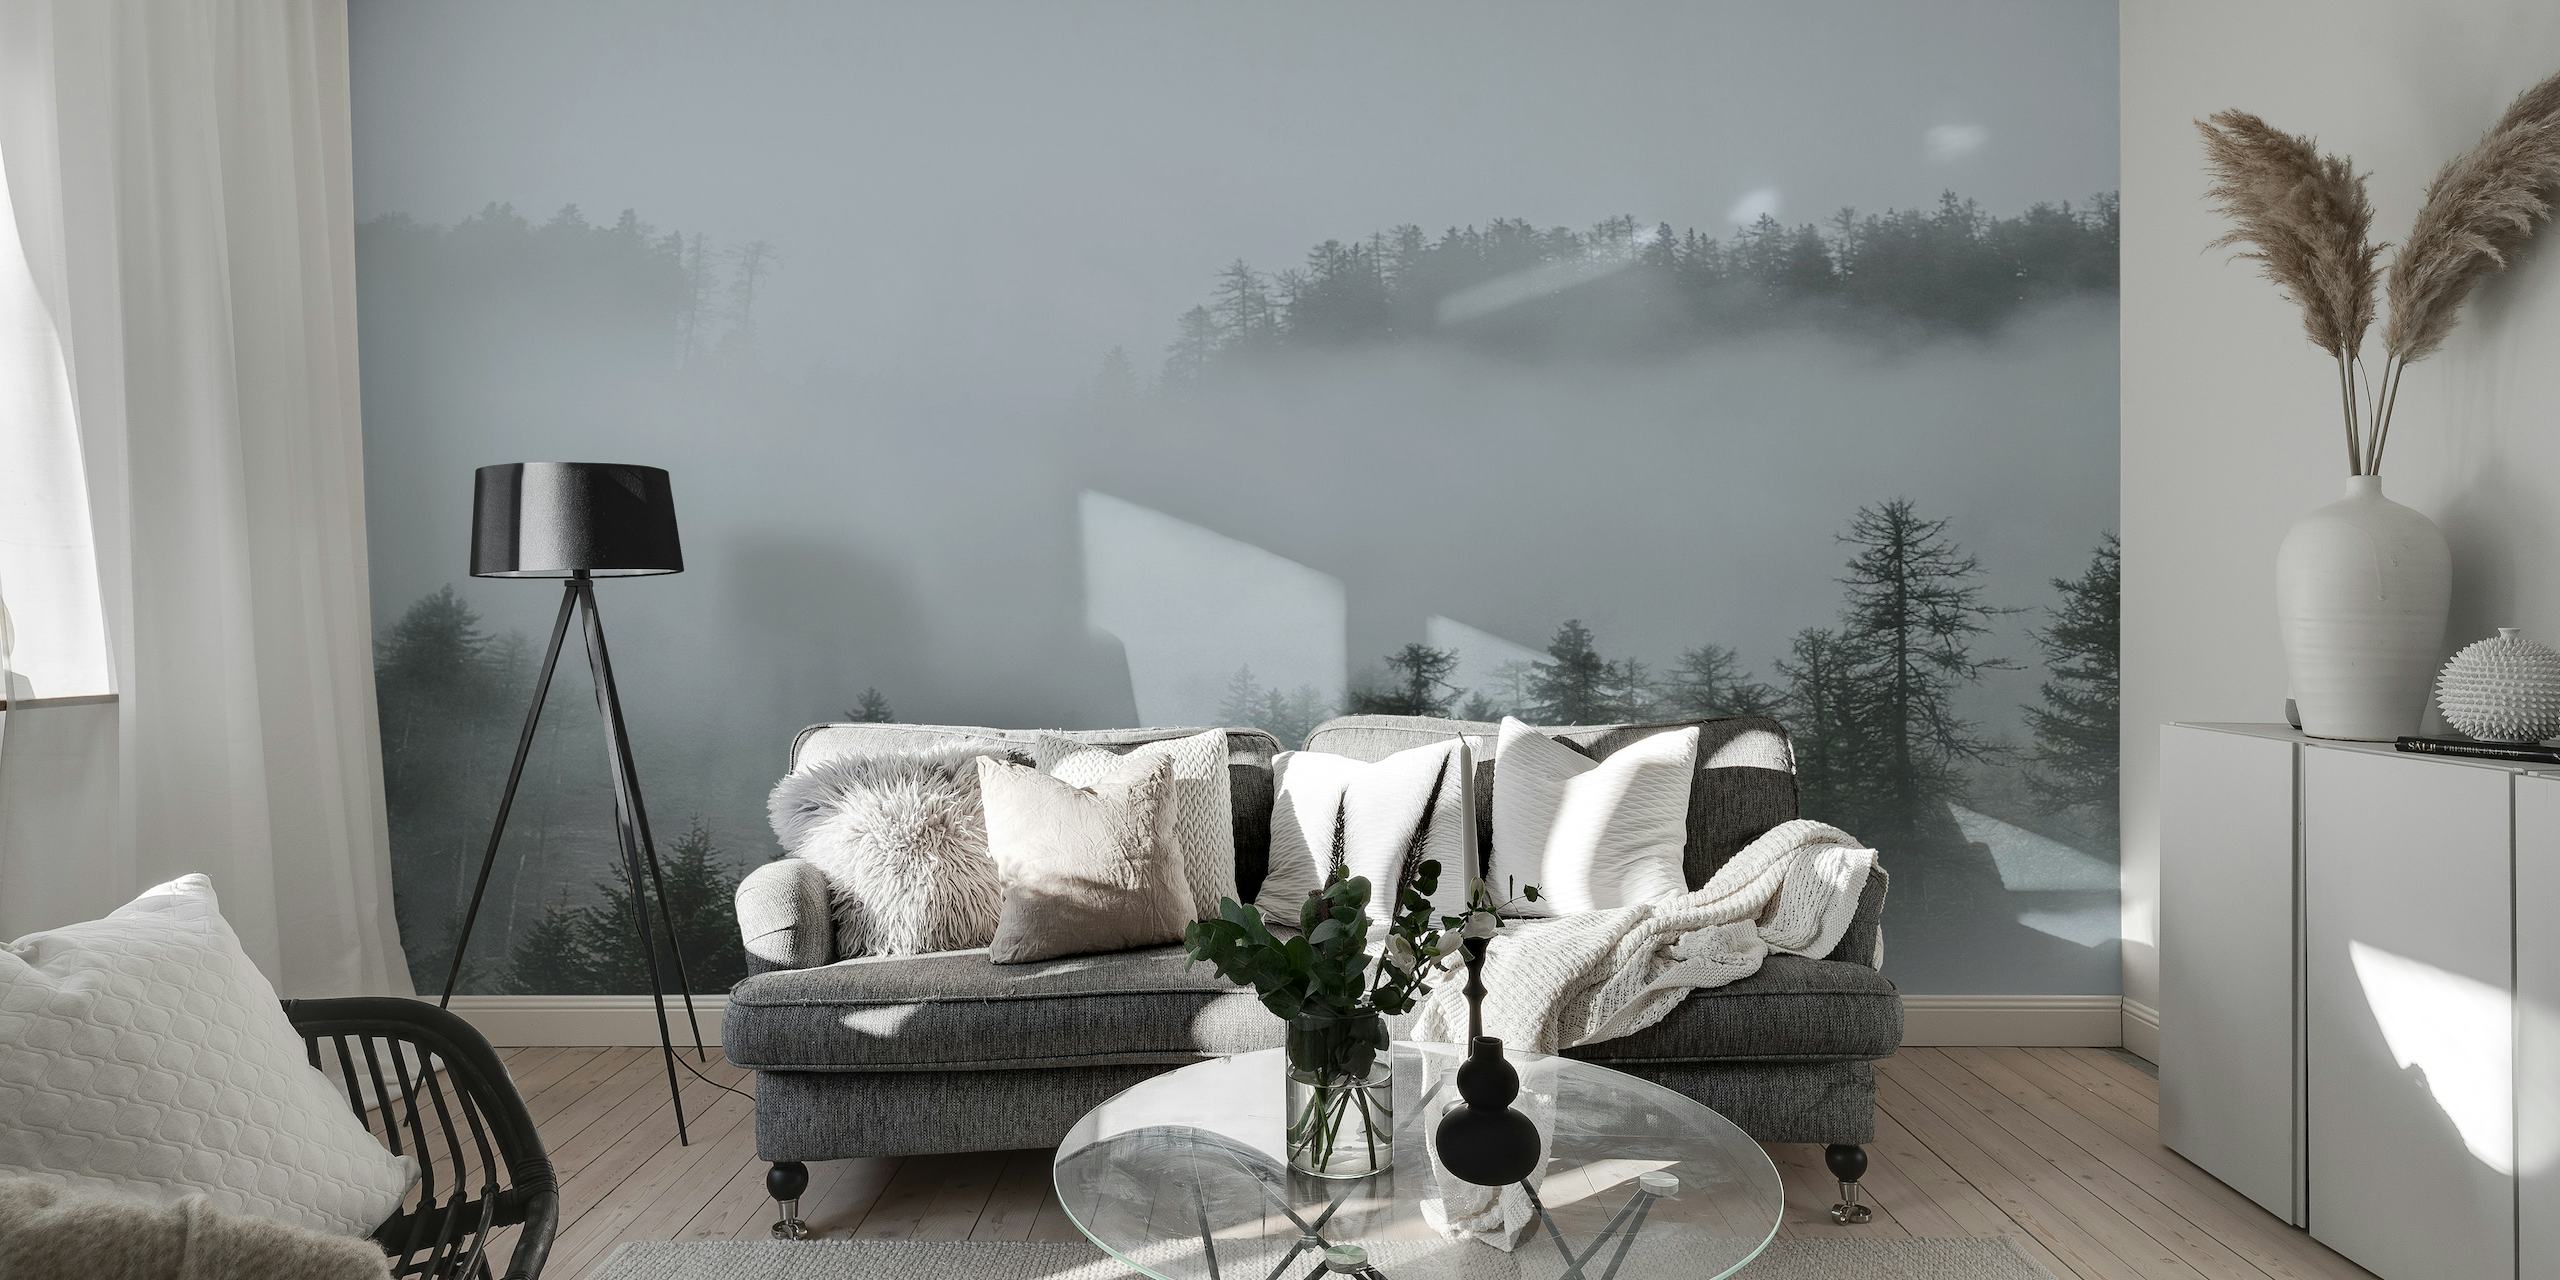 Misty forest wall mural with indistinct tree outlines and foggy hills